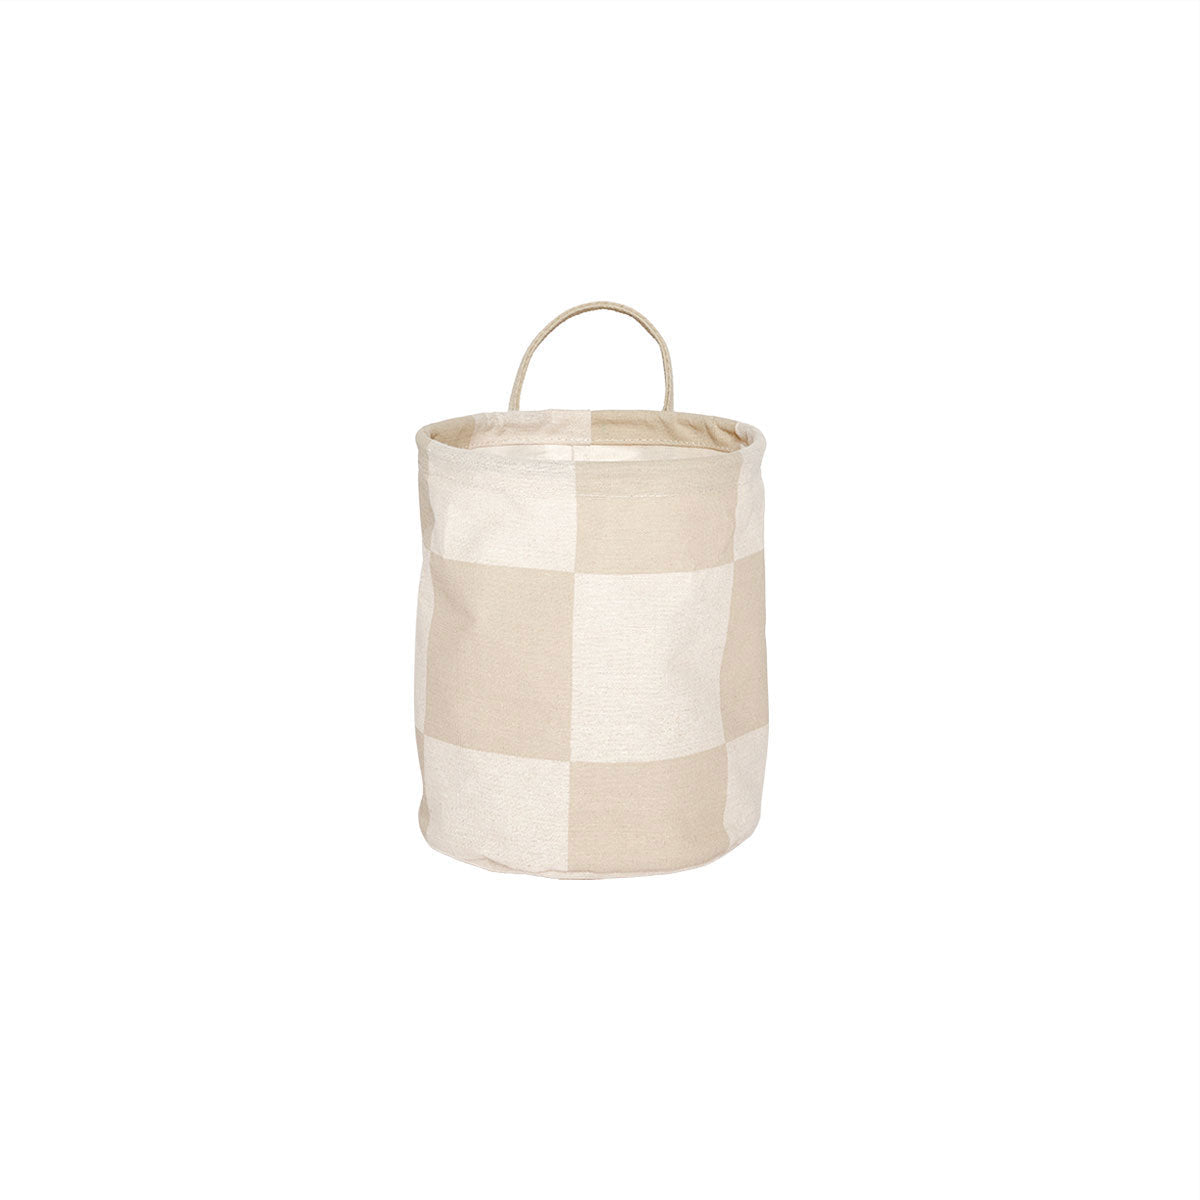 OYOY LIVING Chess Laundry/Storage Basket - Small Storage 306 Clay / Offwhite